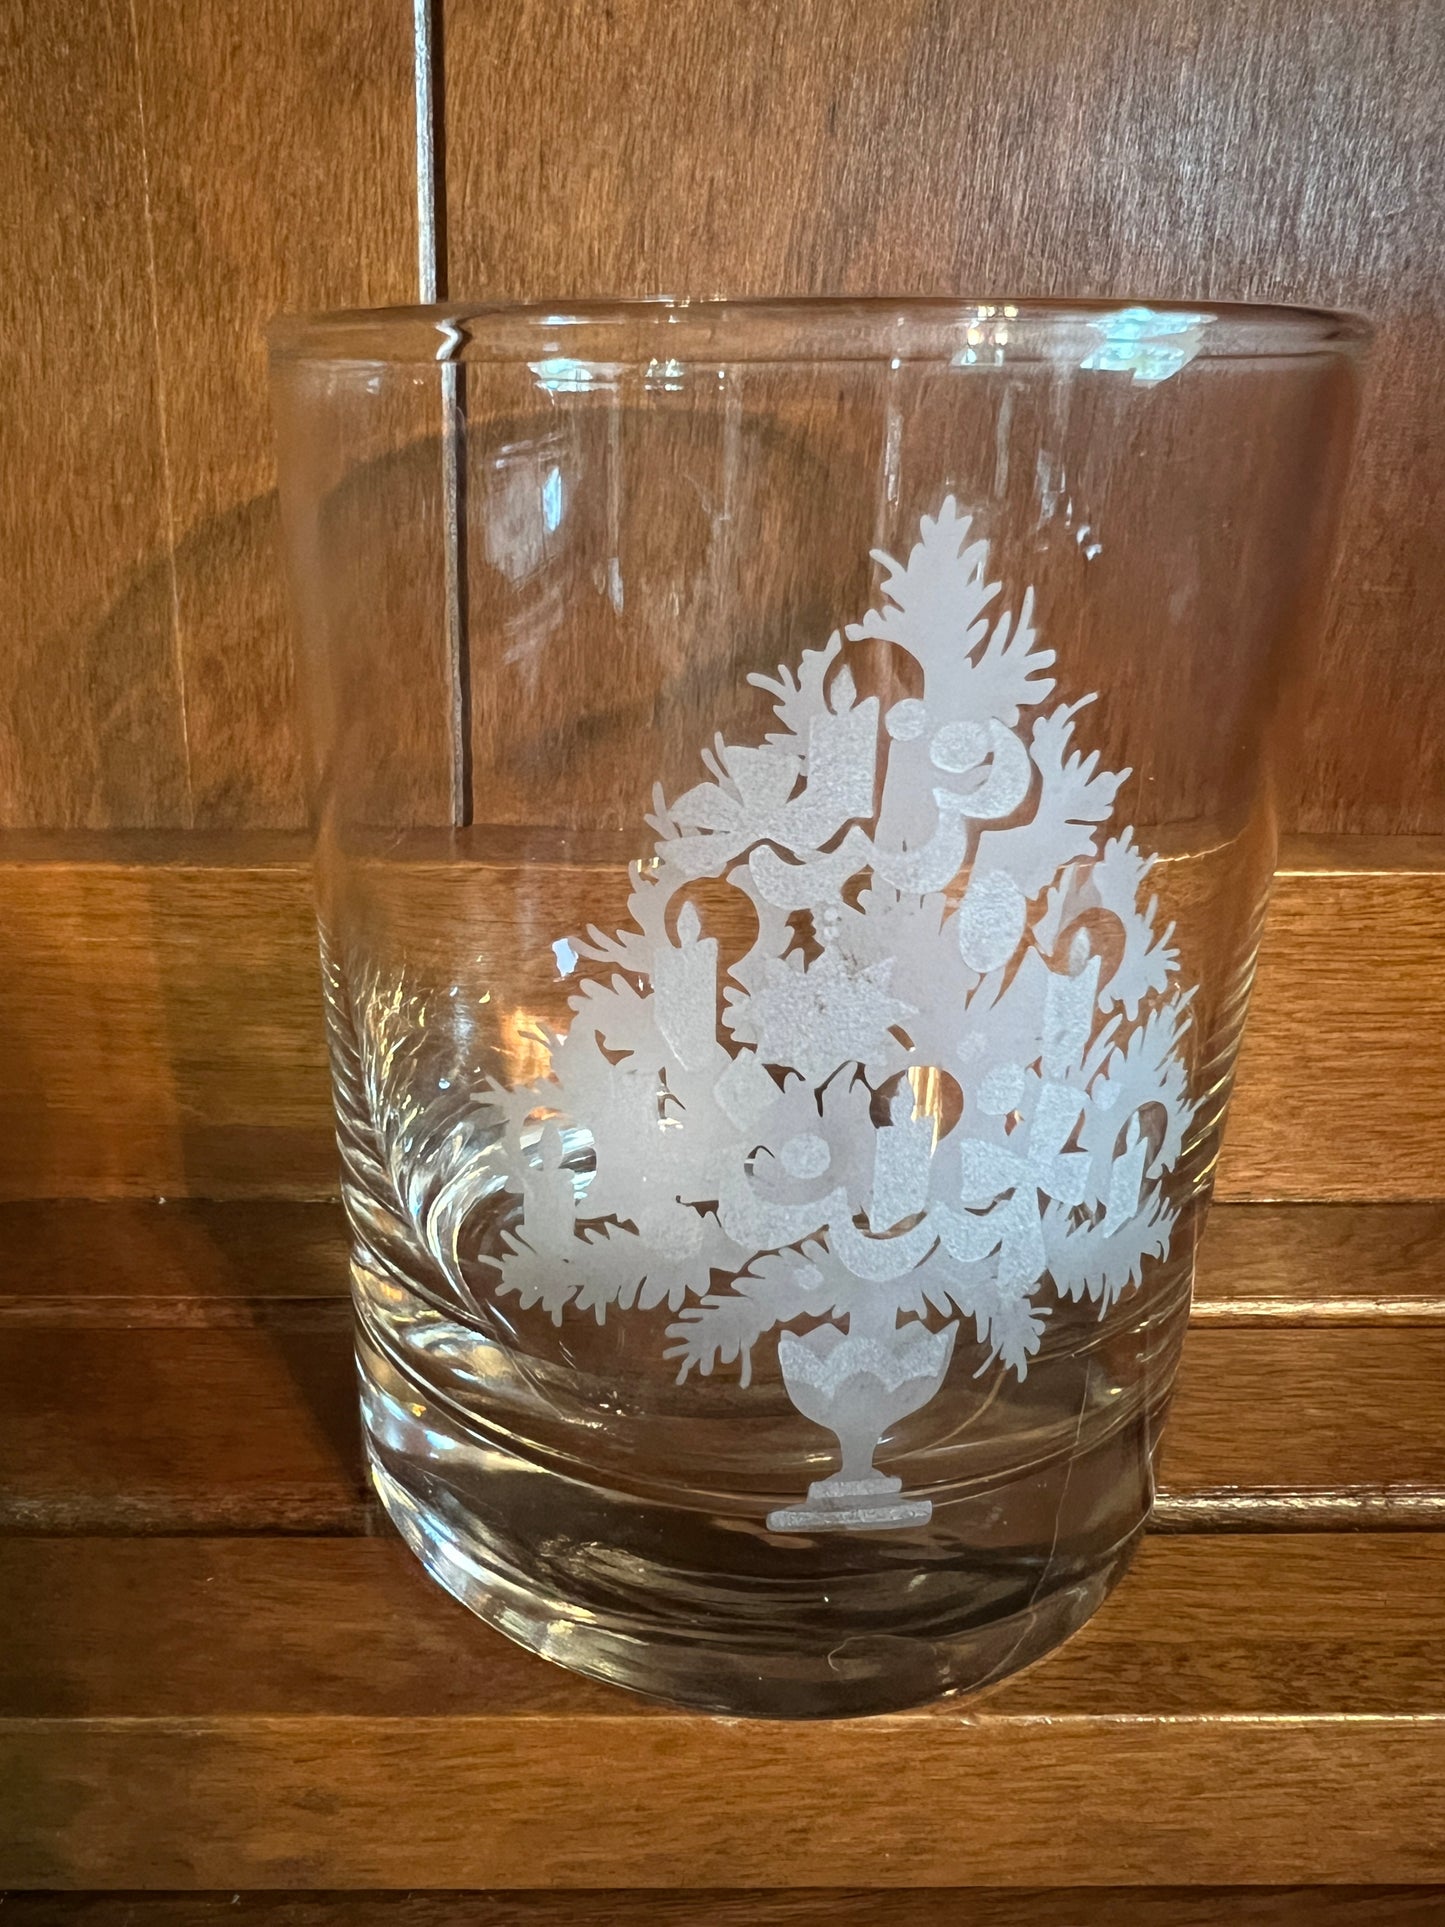 Neiman Marcus Etched Christmas Tree Tumblers (7)